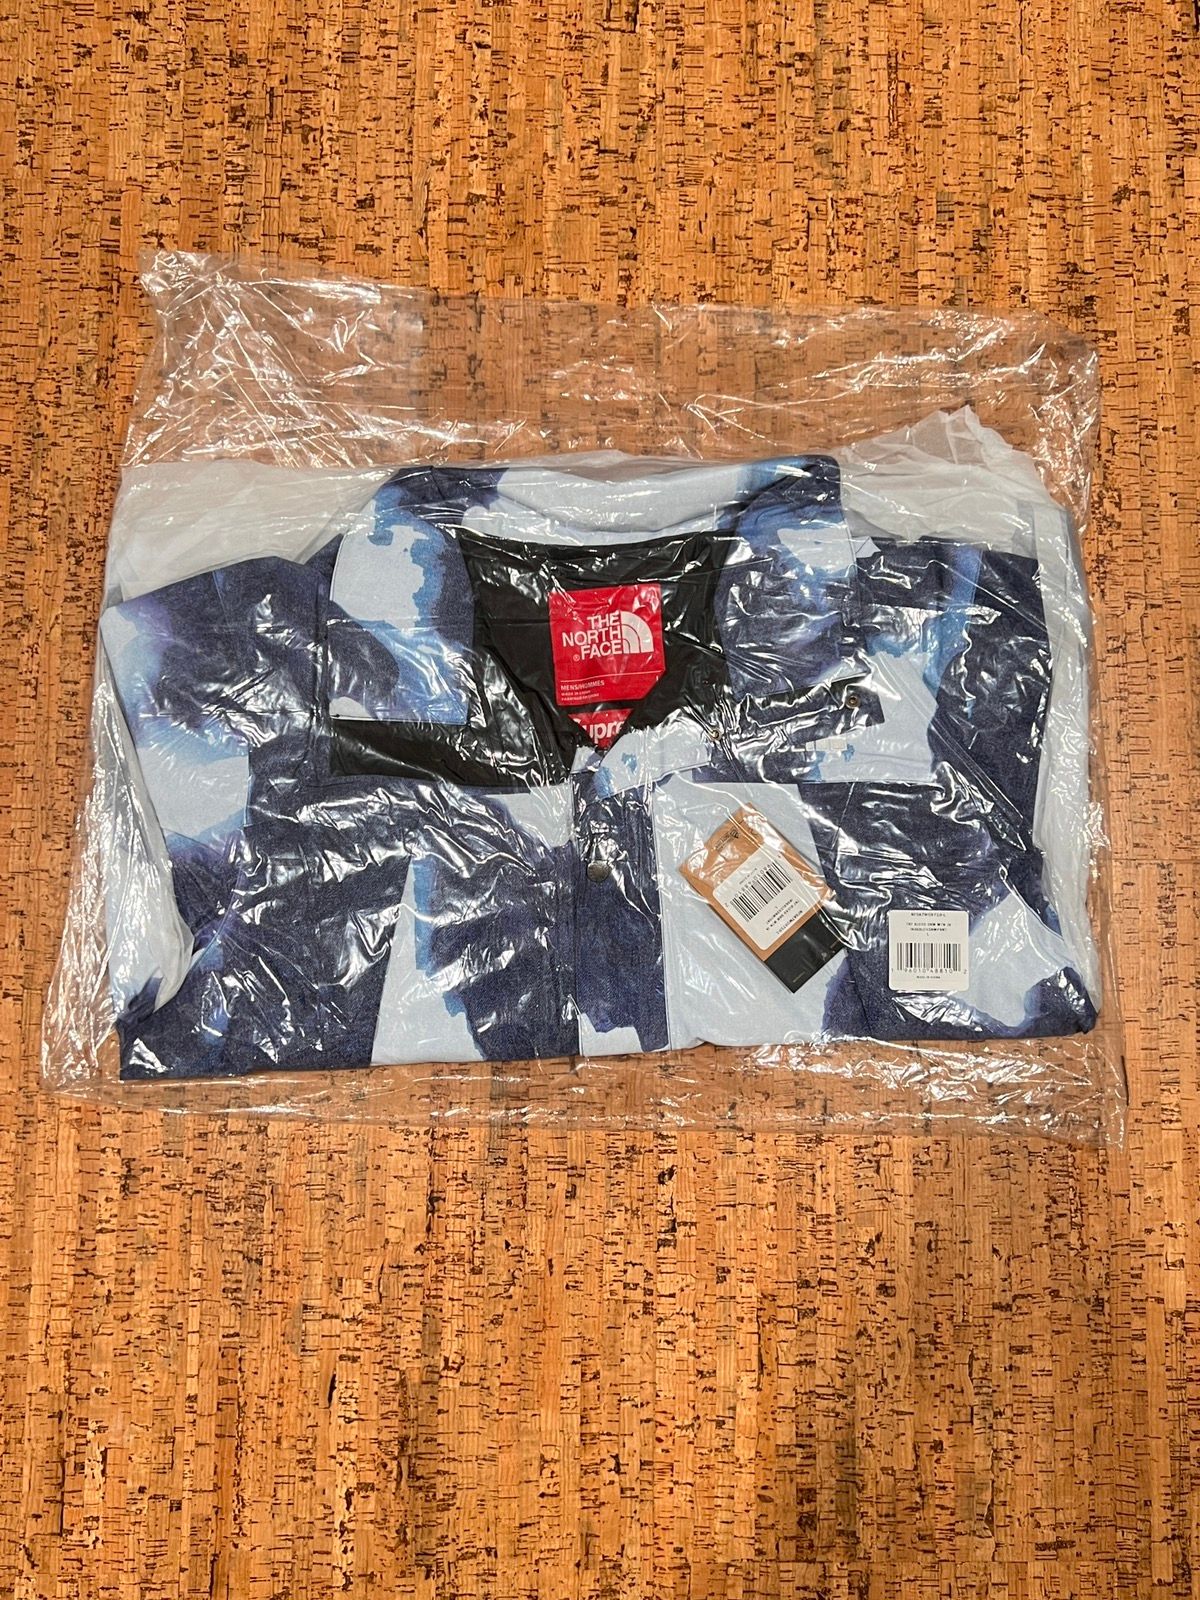 Supreme The North Face Bleached Denim Print Mountain Jacket